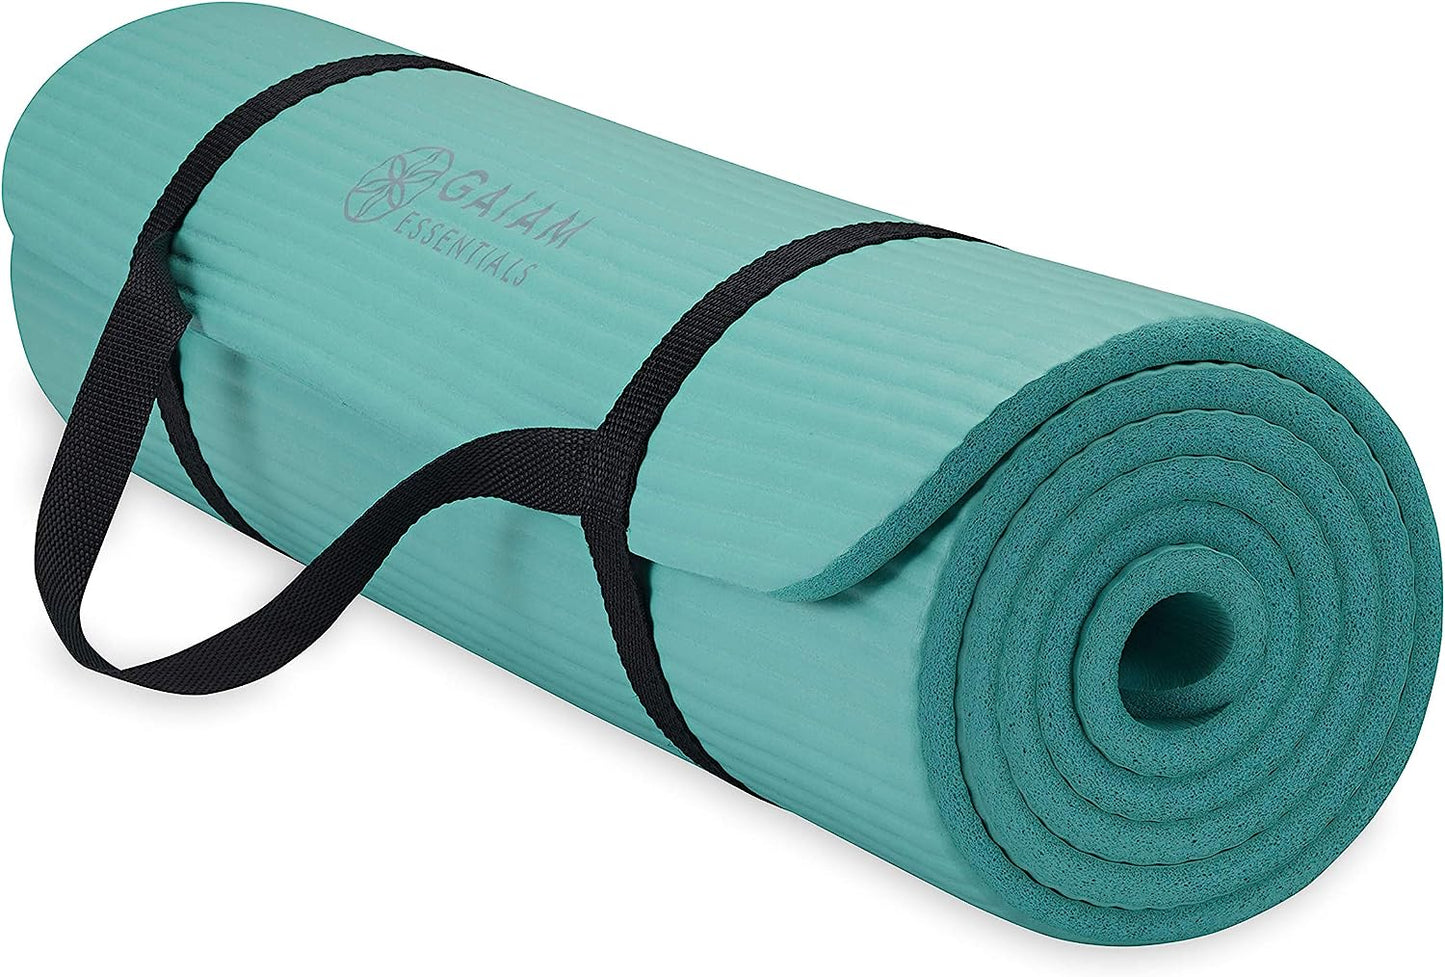 Thick Yoga Mat Fitness & Exercise Mat with Easy-Cinch Yoga Mat Carrier Strap, 72"L x 24"W x 2/5 Inch Thick